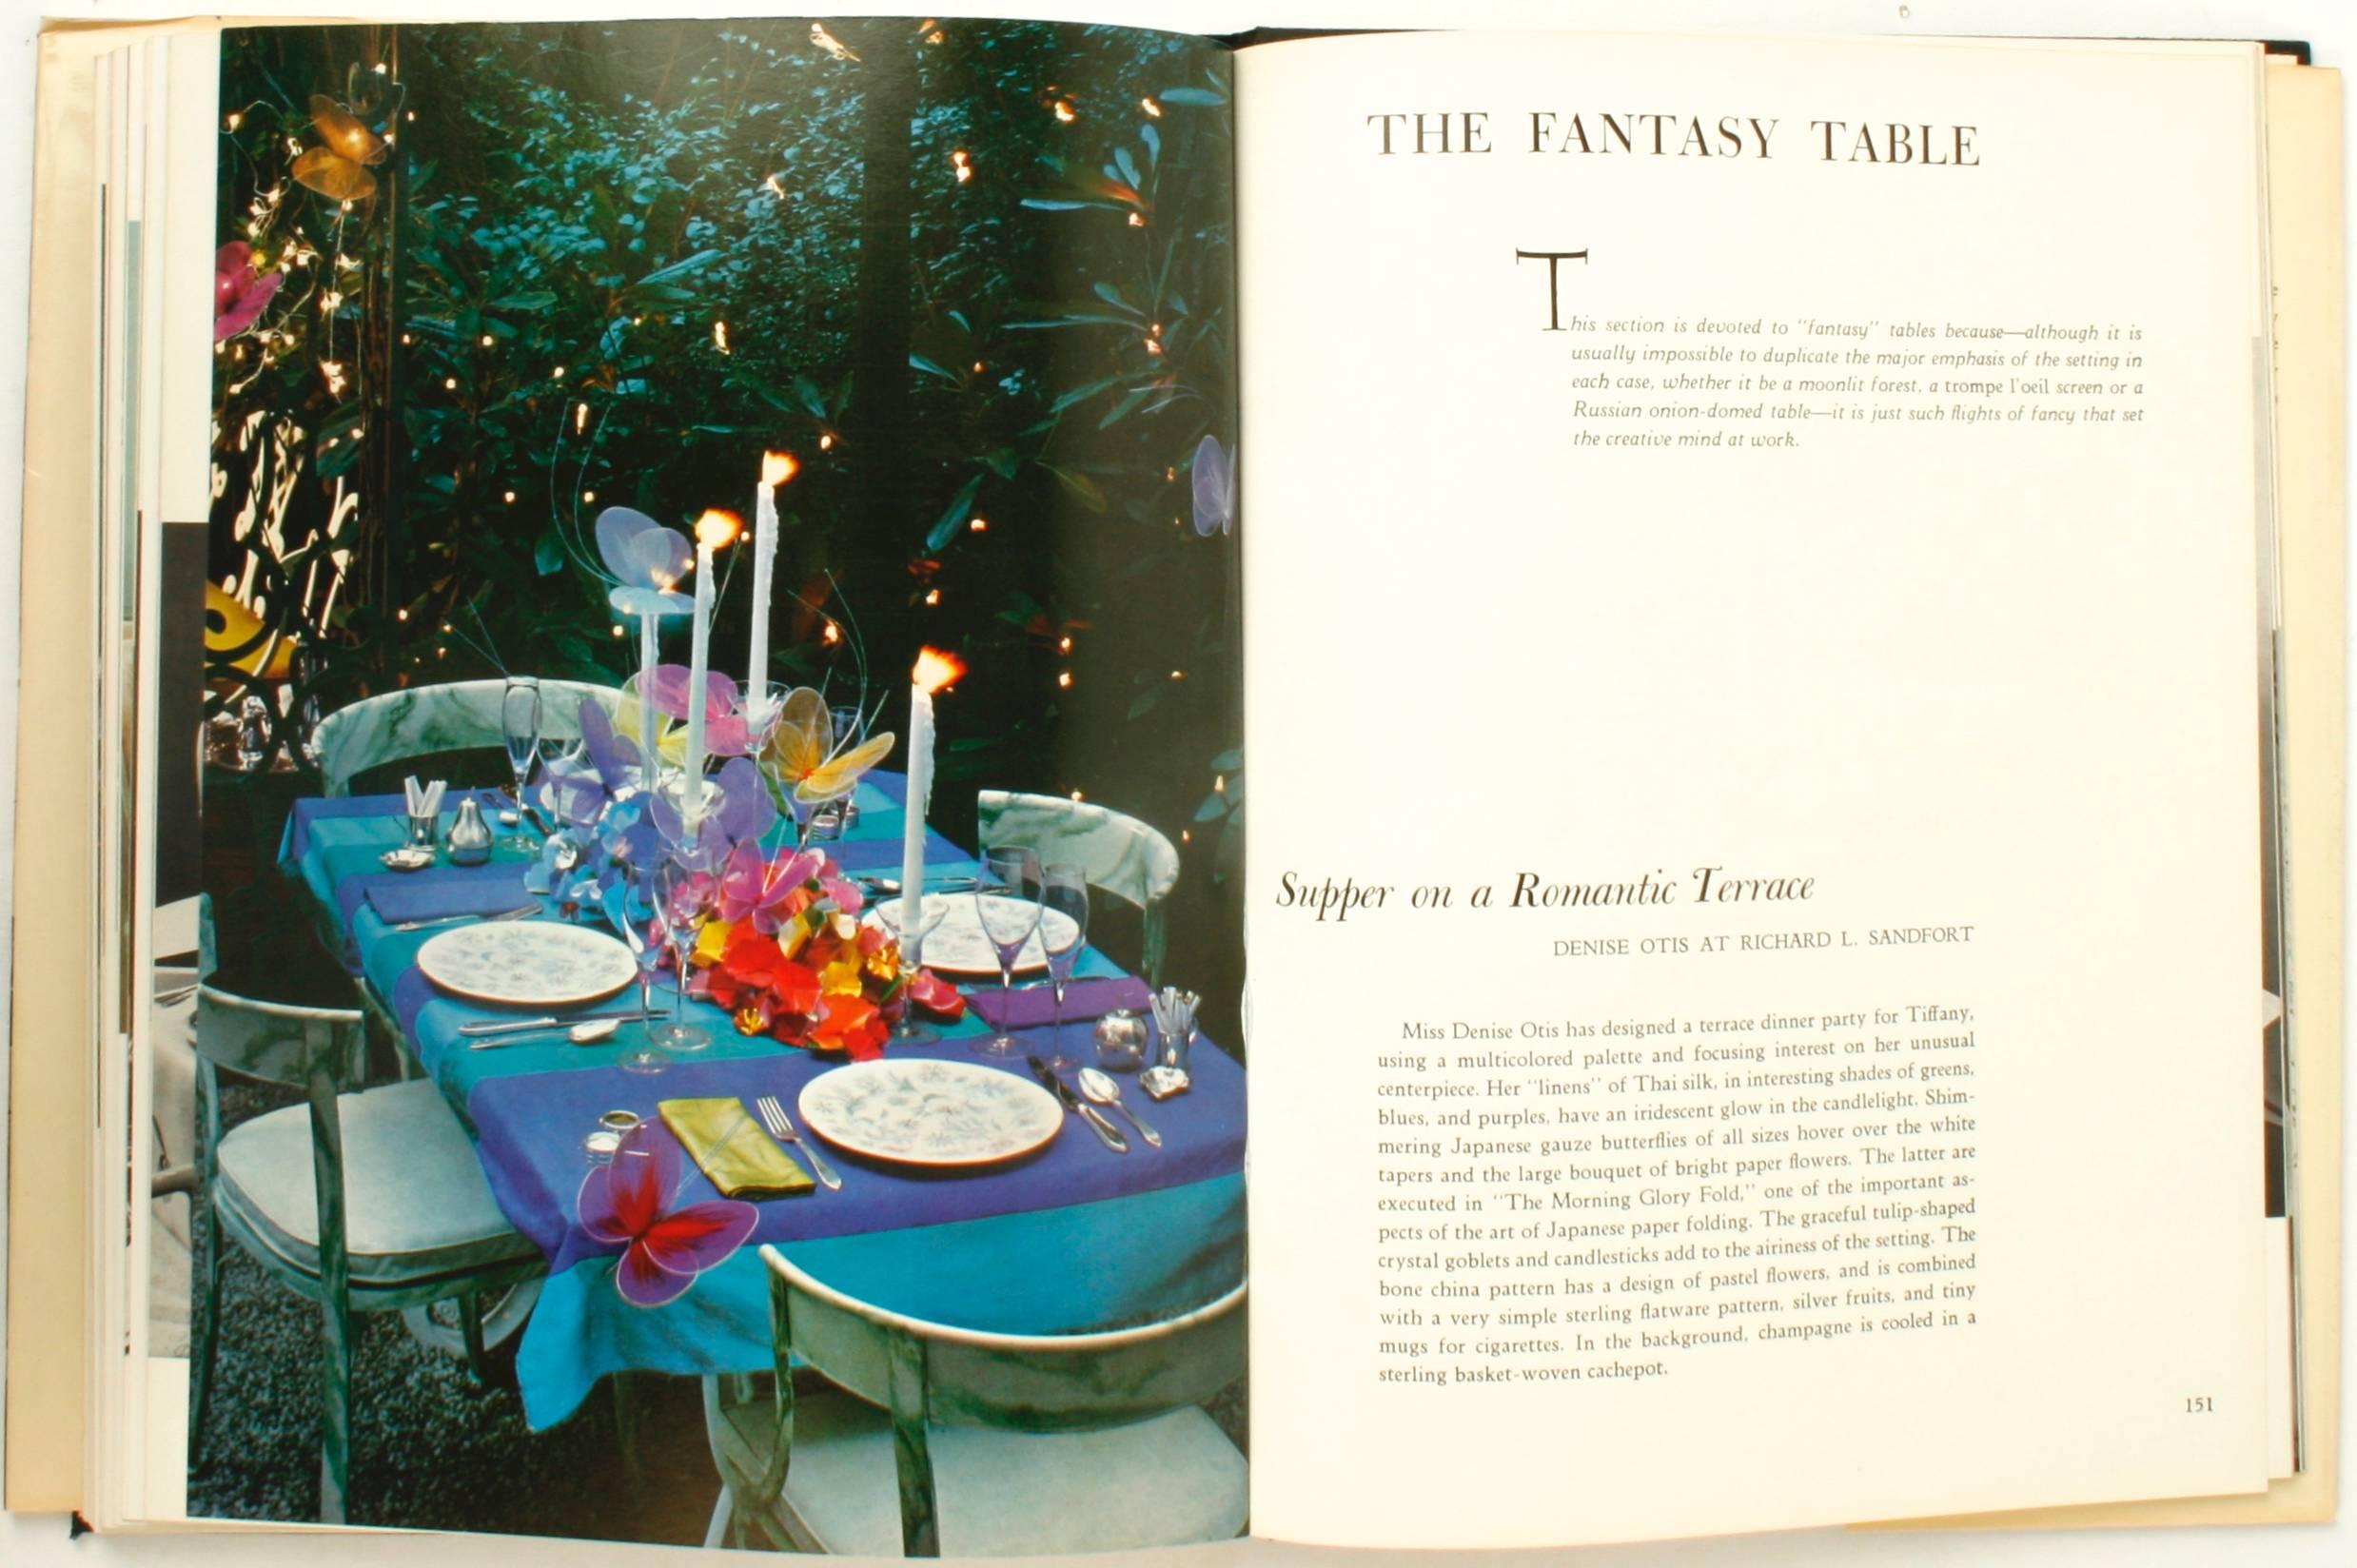 Tiffany Table Settings. New York: Bramhall House. First edition hardcover with dust jacket, 1960. 196 pp. A pictorial overview of Tiffany table settings from 1960 done by prominent hostesses such as Mrs. William Paley, Mrs. Clare Boothe Luce, Mrs.